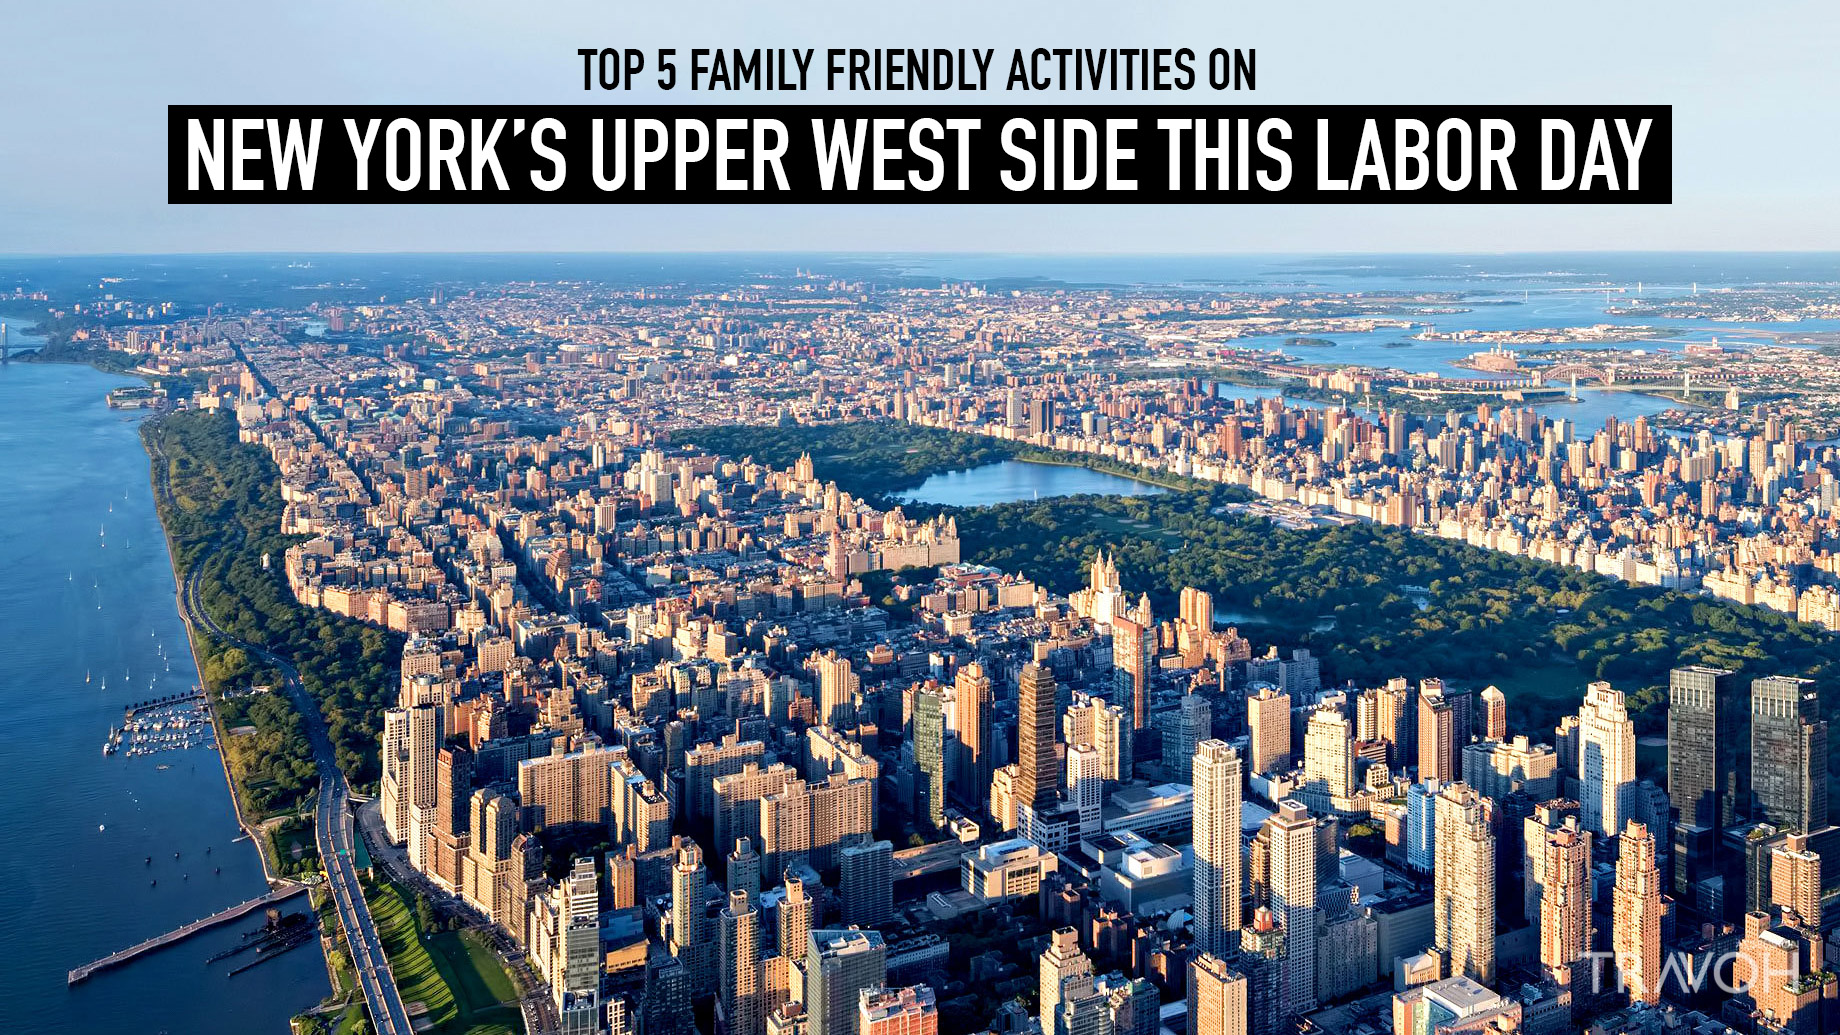 Top 5 Family-Friendly Activities on New York’s Upper West Side this Labor Day